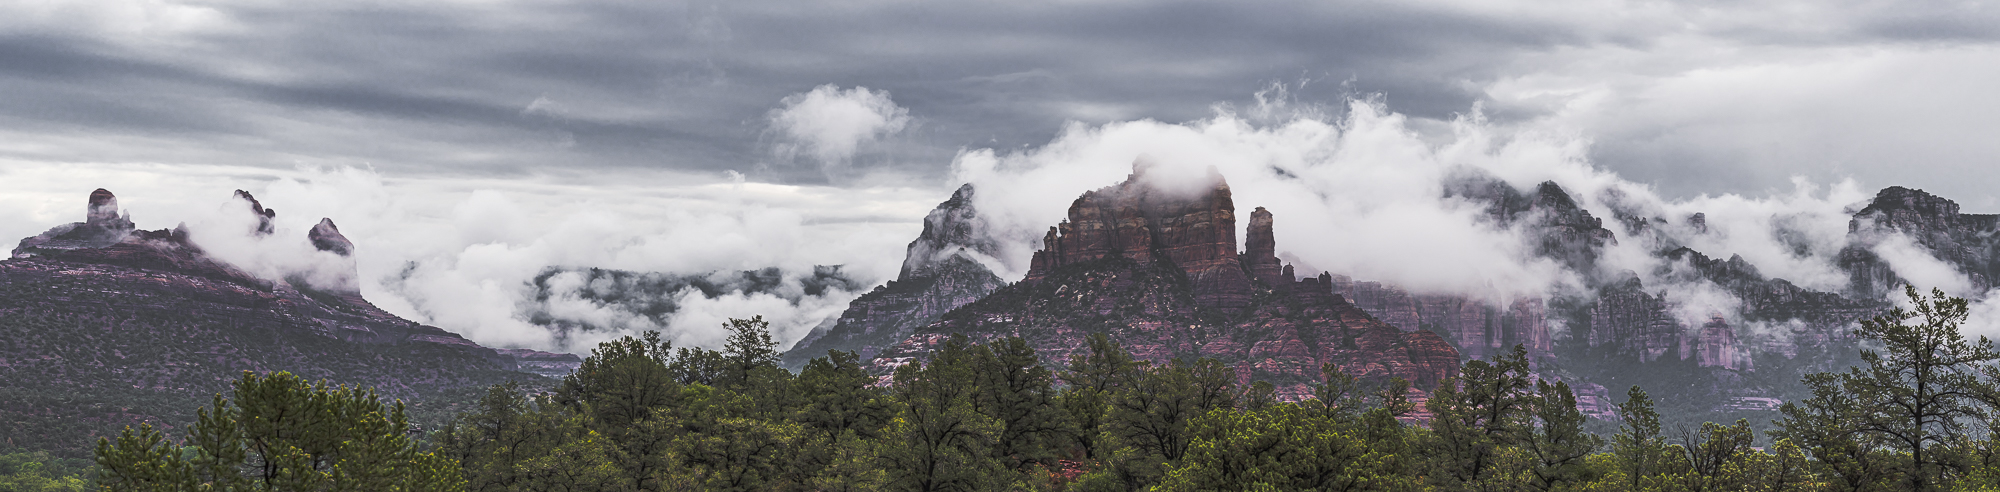 “Monsoon Clouds Over the Mogollon Rim”, 5nd edit